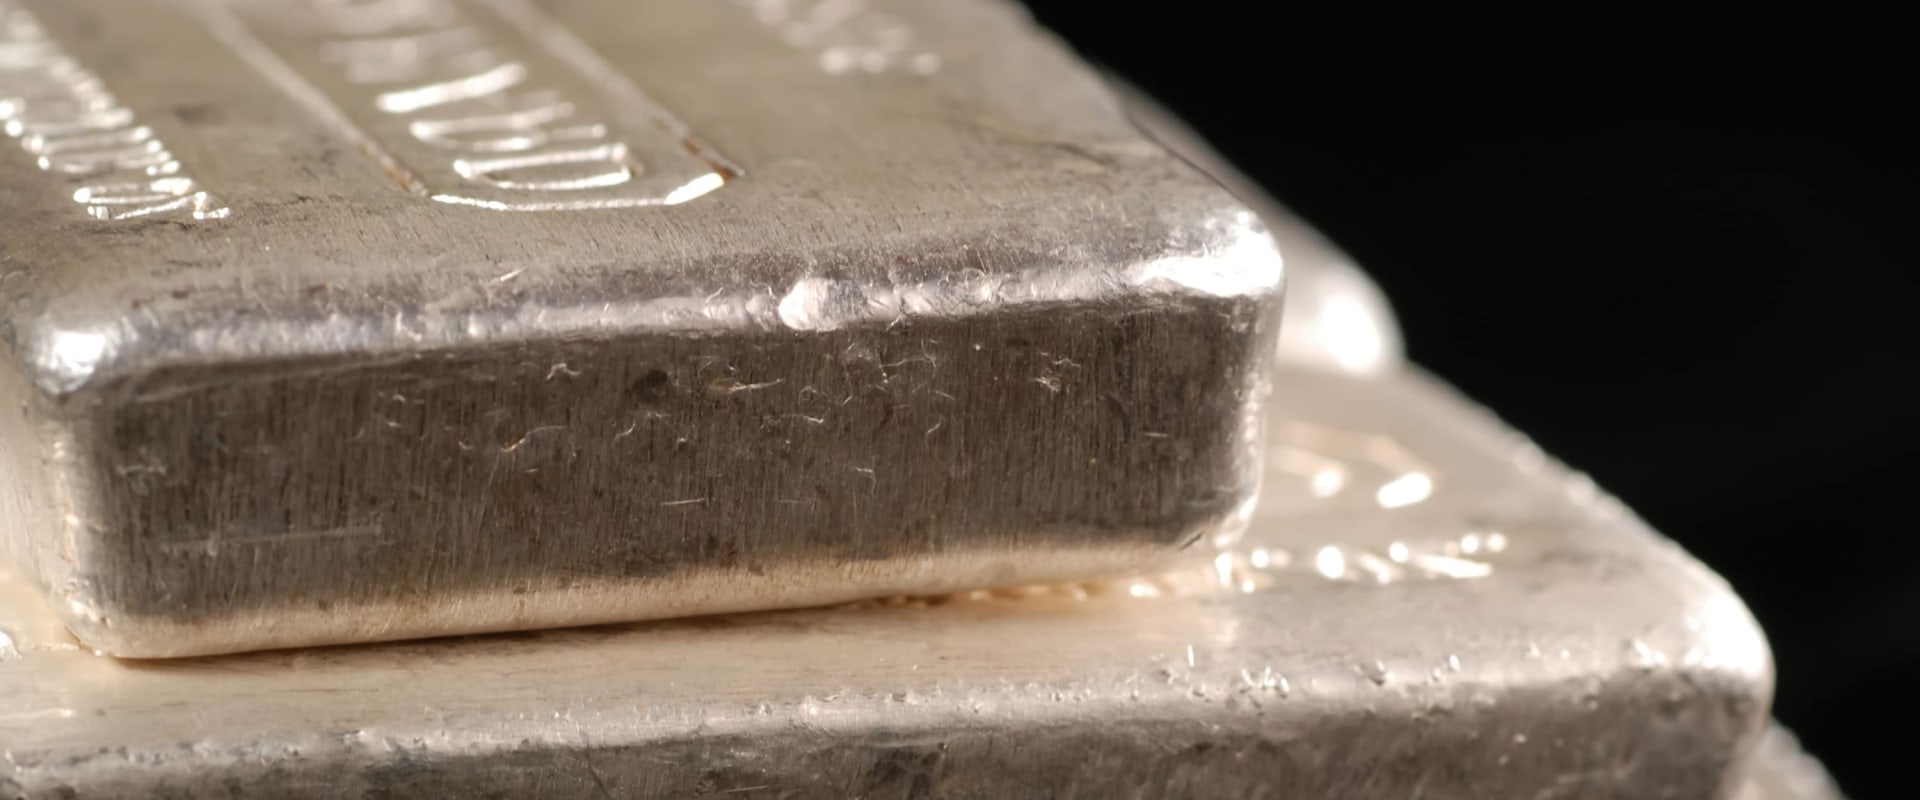 Is investing in silver profitable?